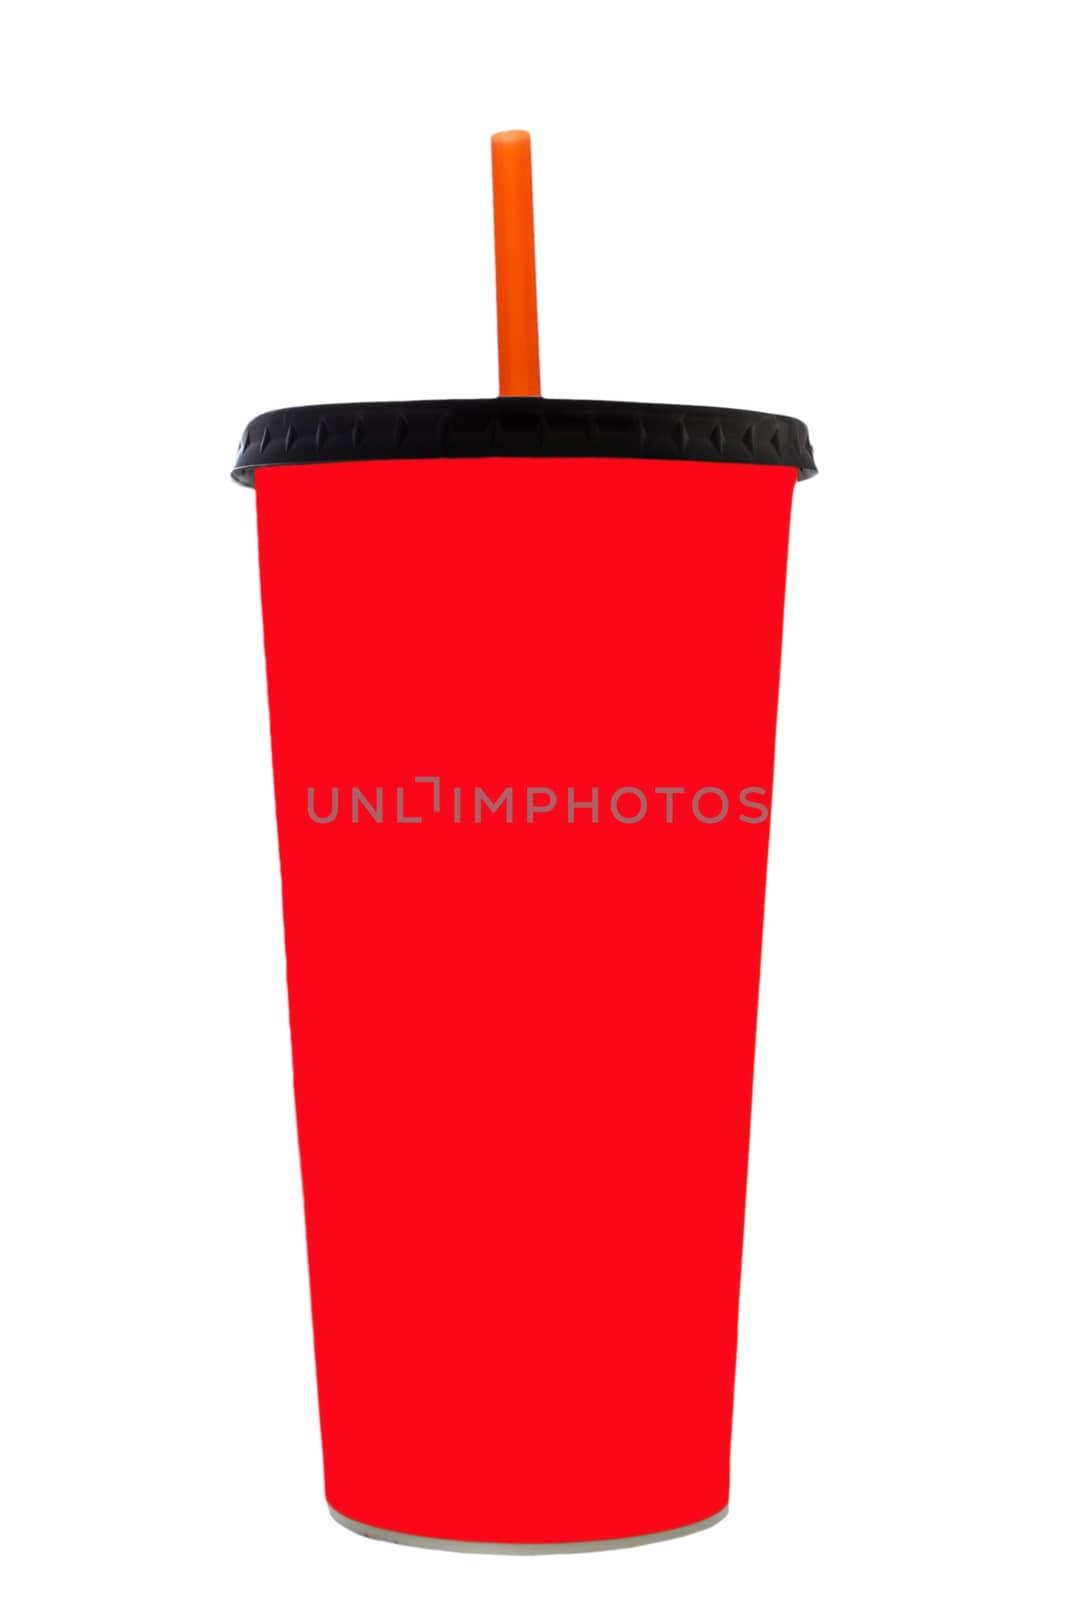 Fast food drinking cup by jimbophoto